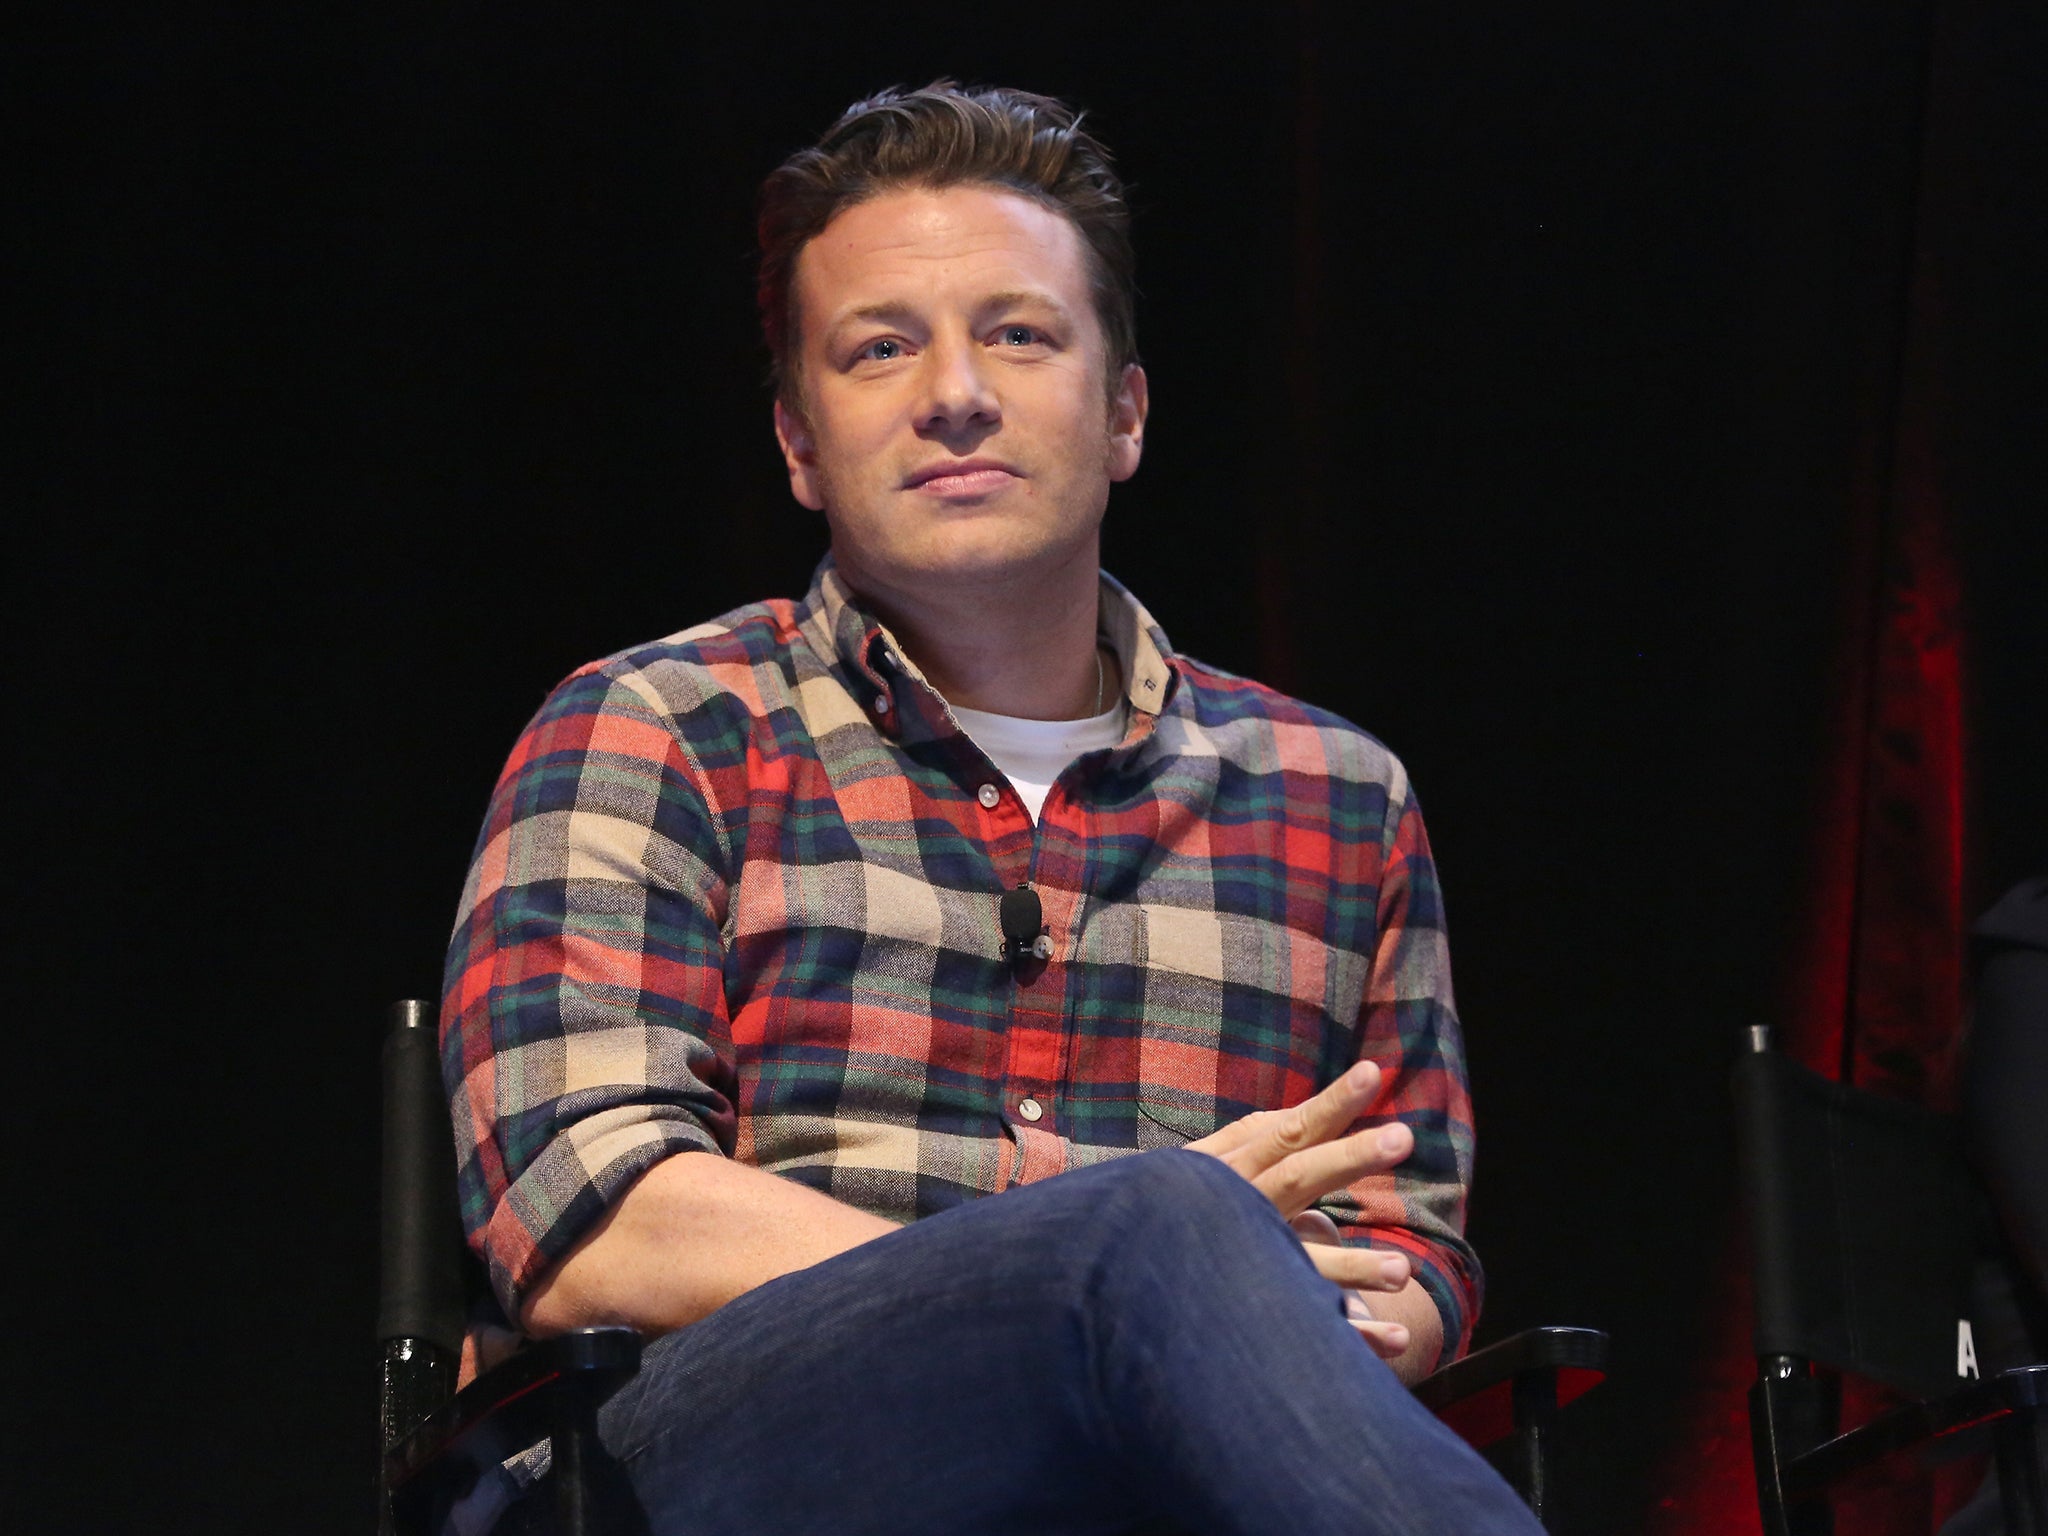 Jamie Oliver says he holds a 'categoric belief in a sugar tax'